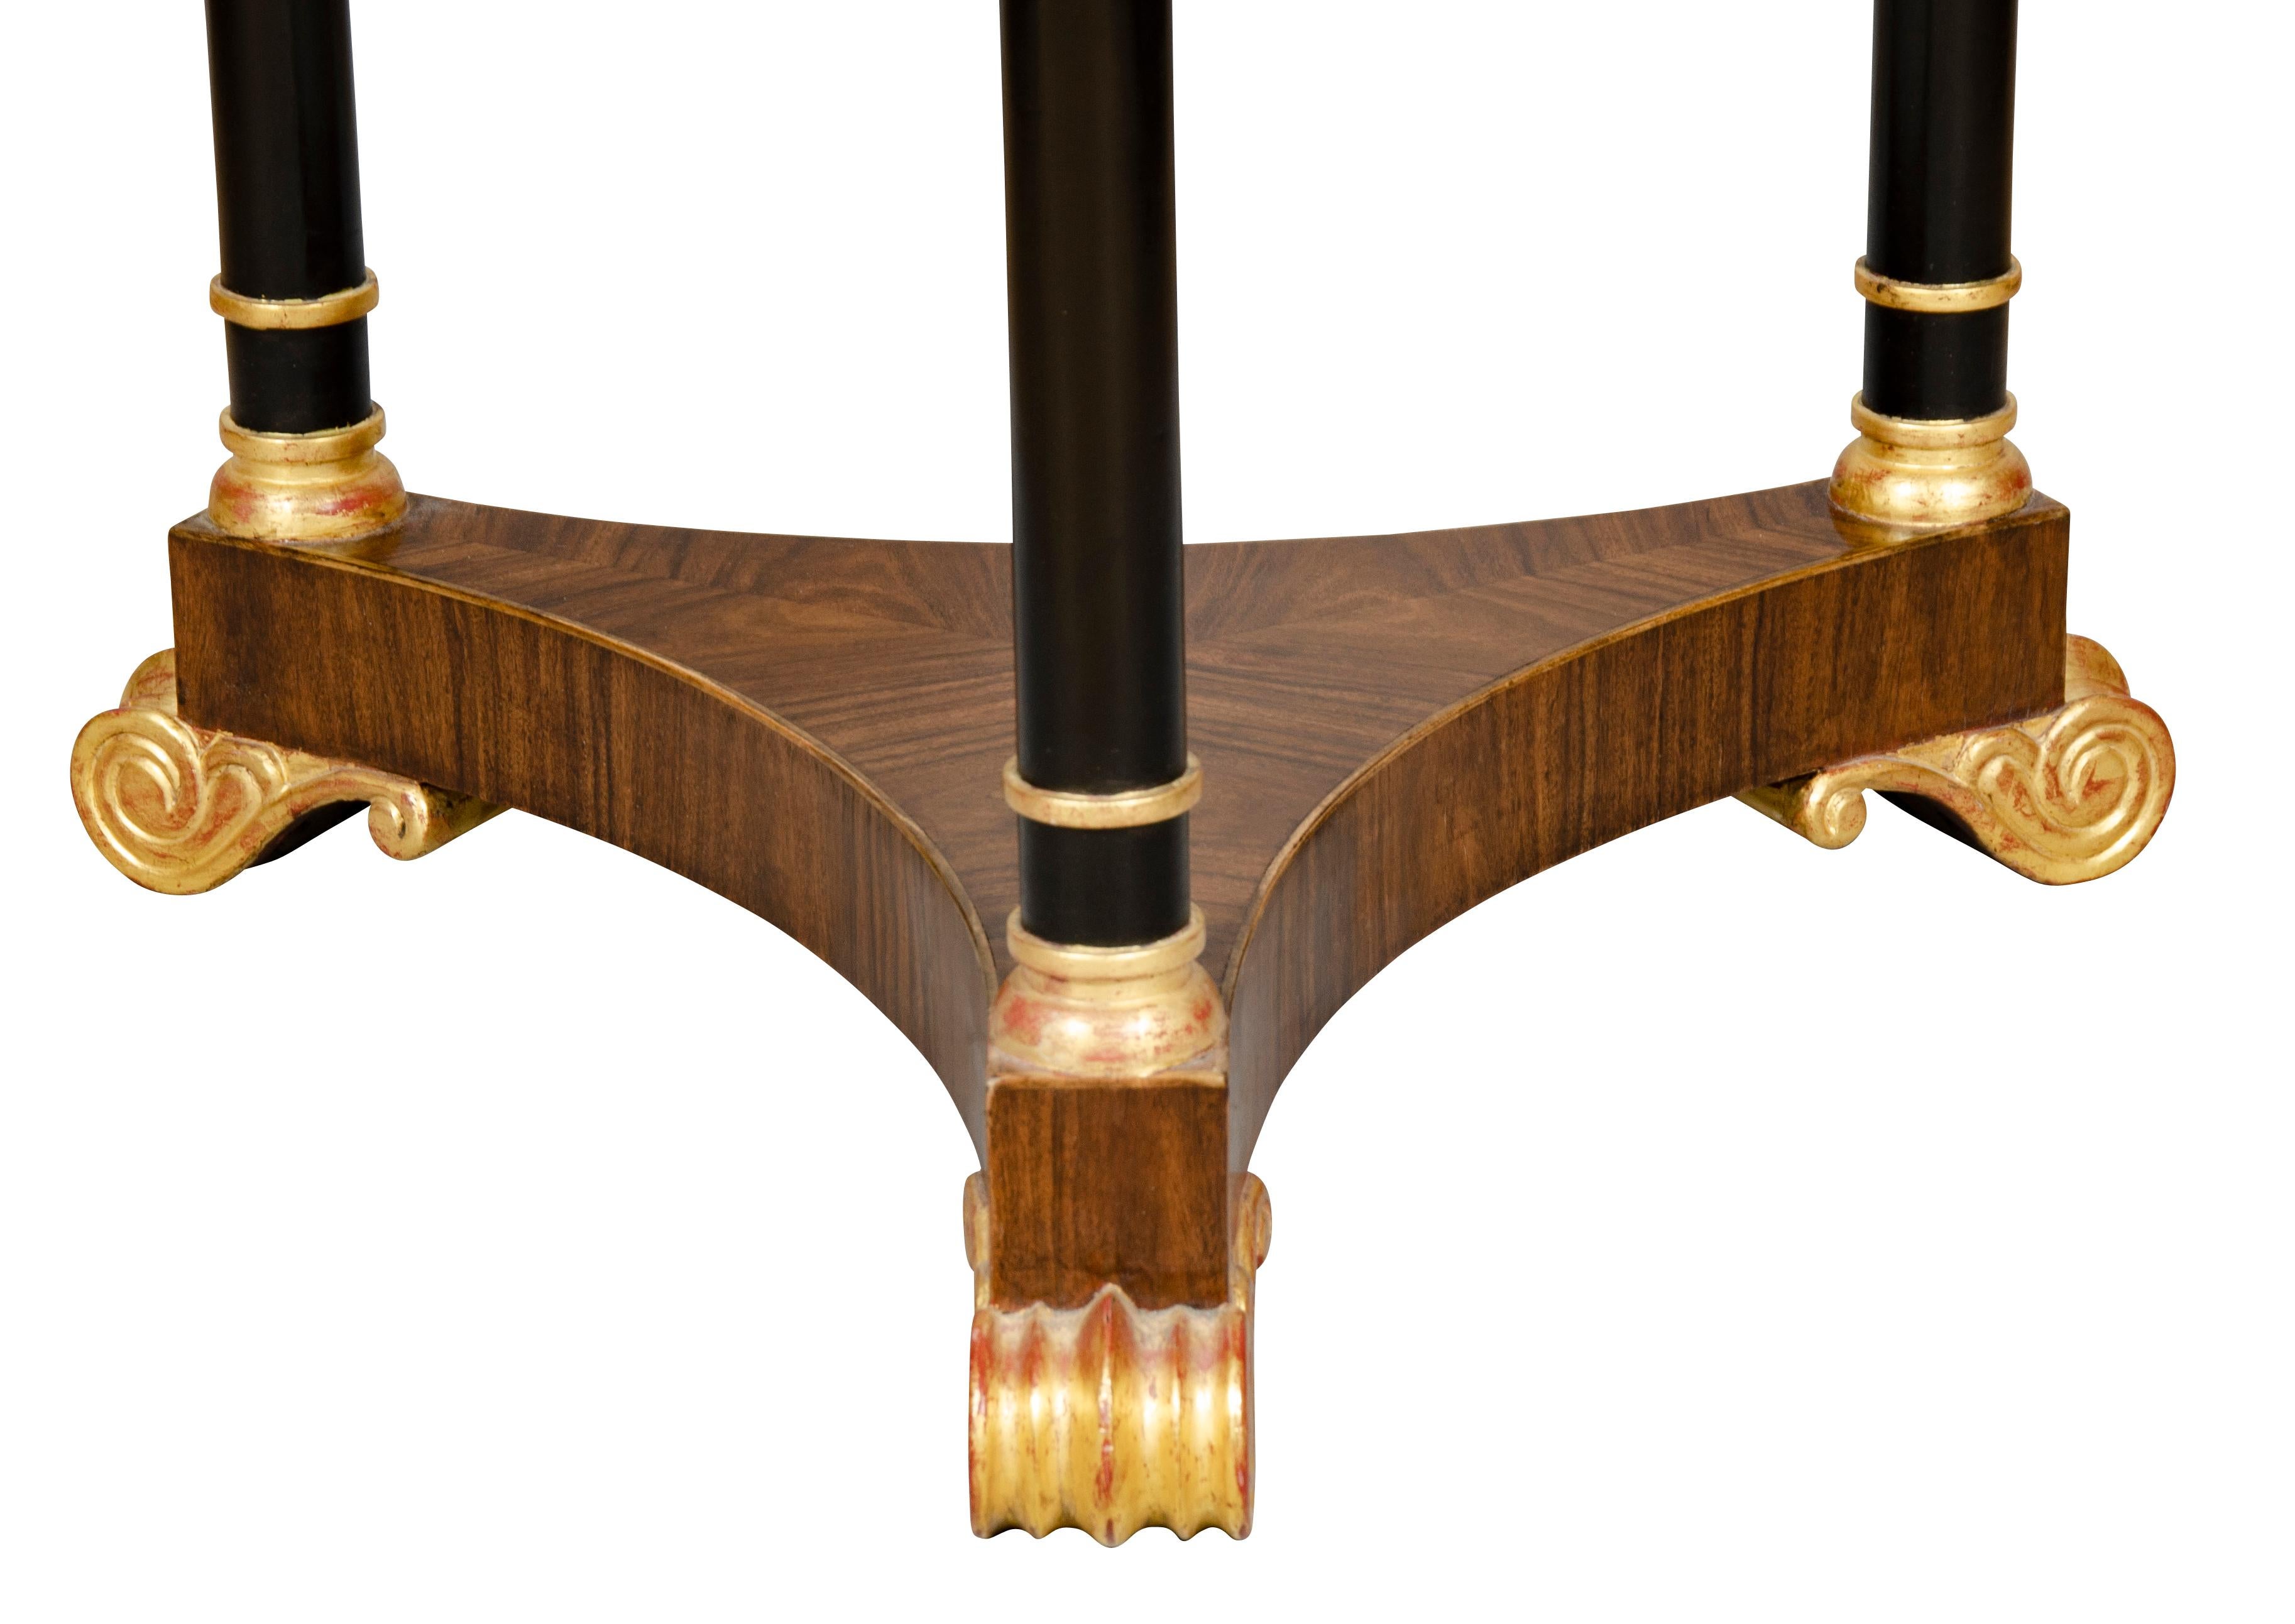 Regency Style Mahogany and Giltwood Table For Sale 8